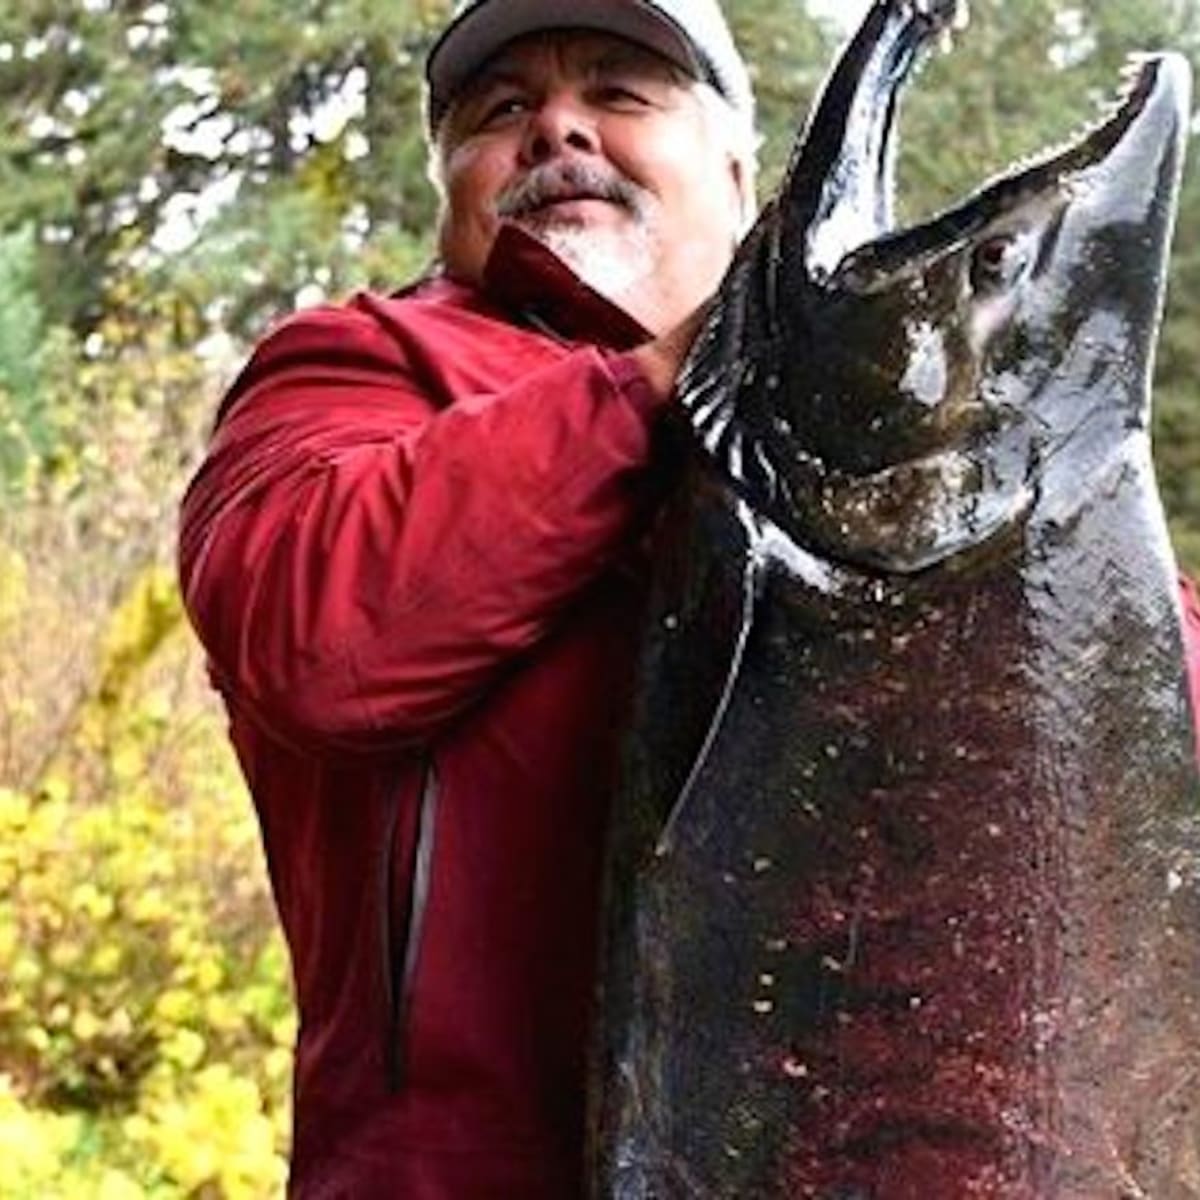 Huge Chinook salmon intercepted swimming upriver is one for the ages -  Men's Journal